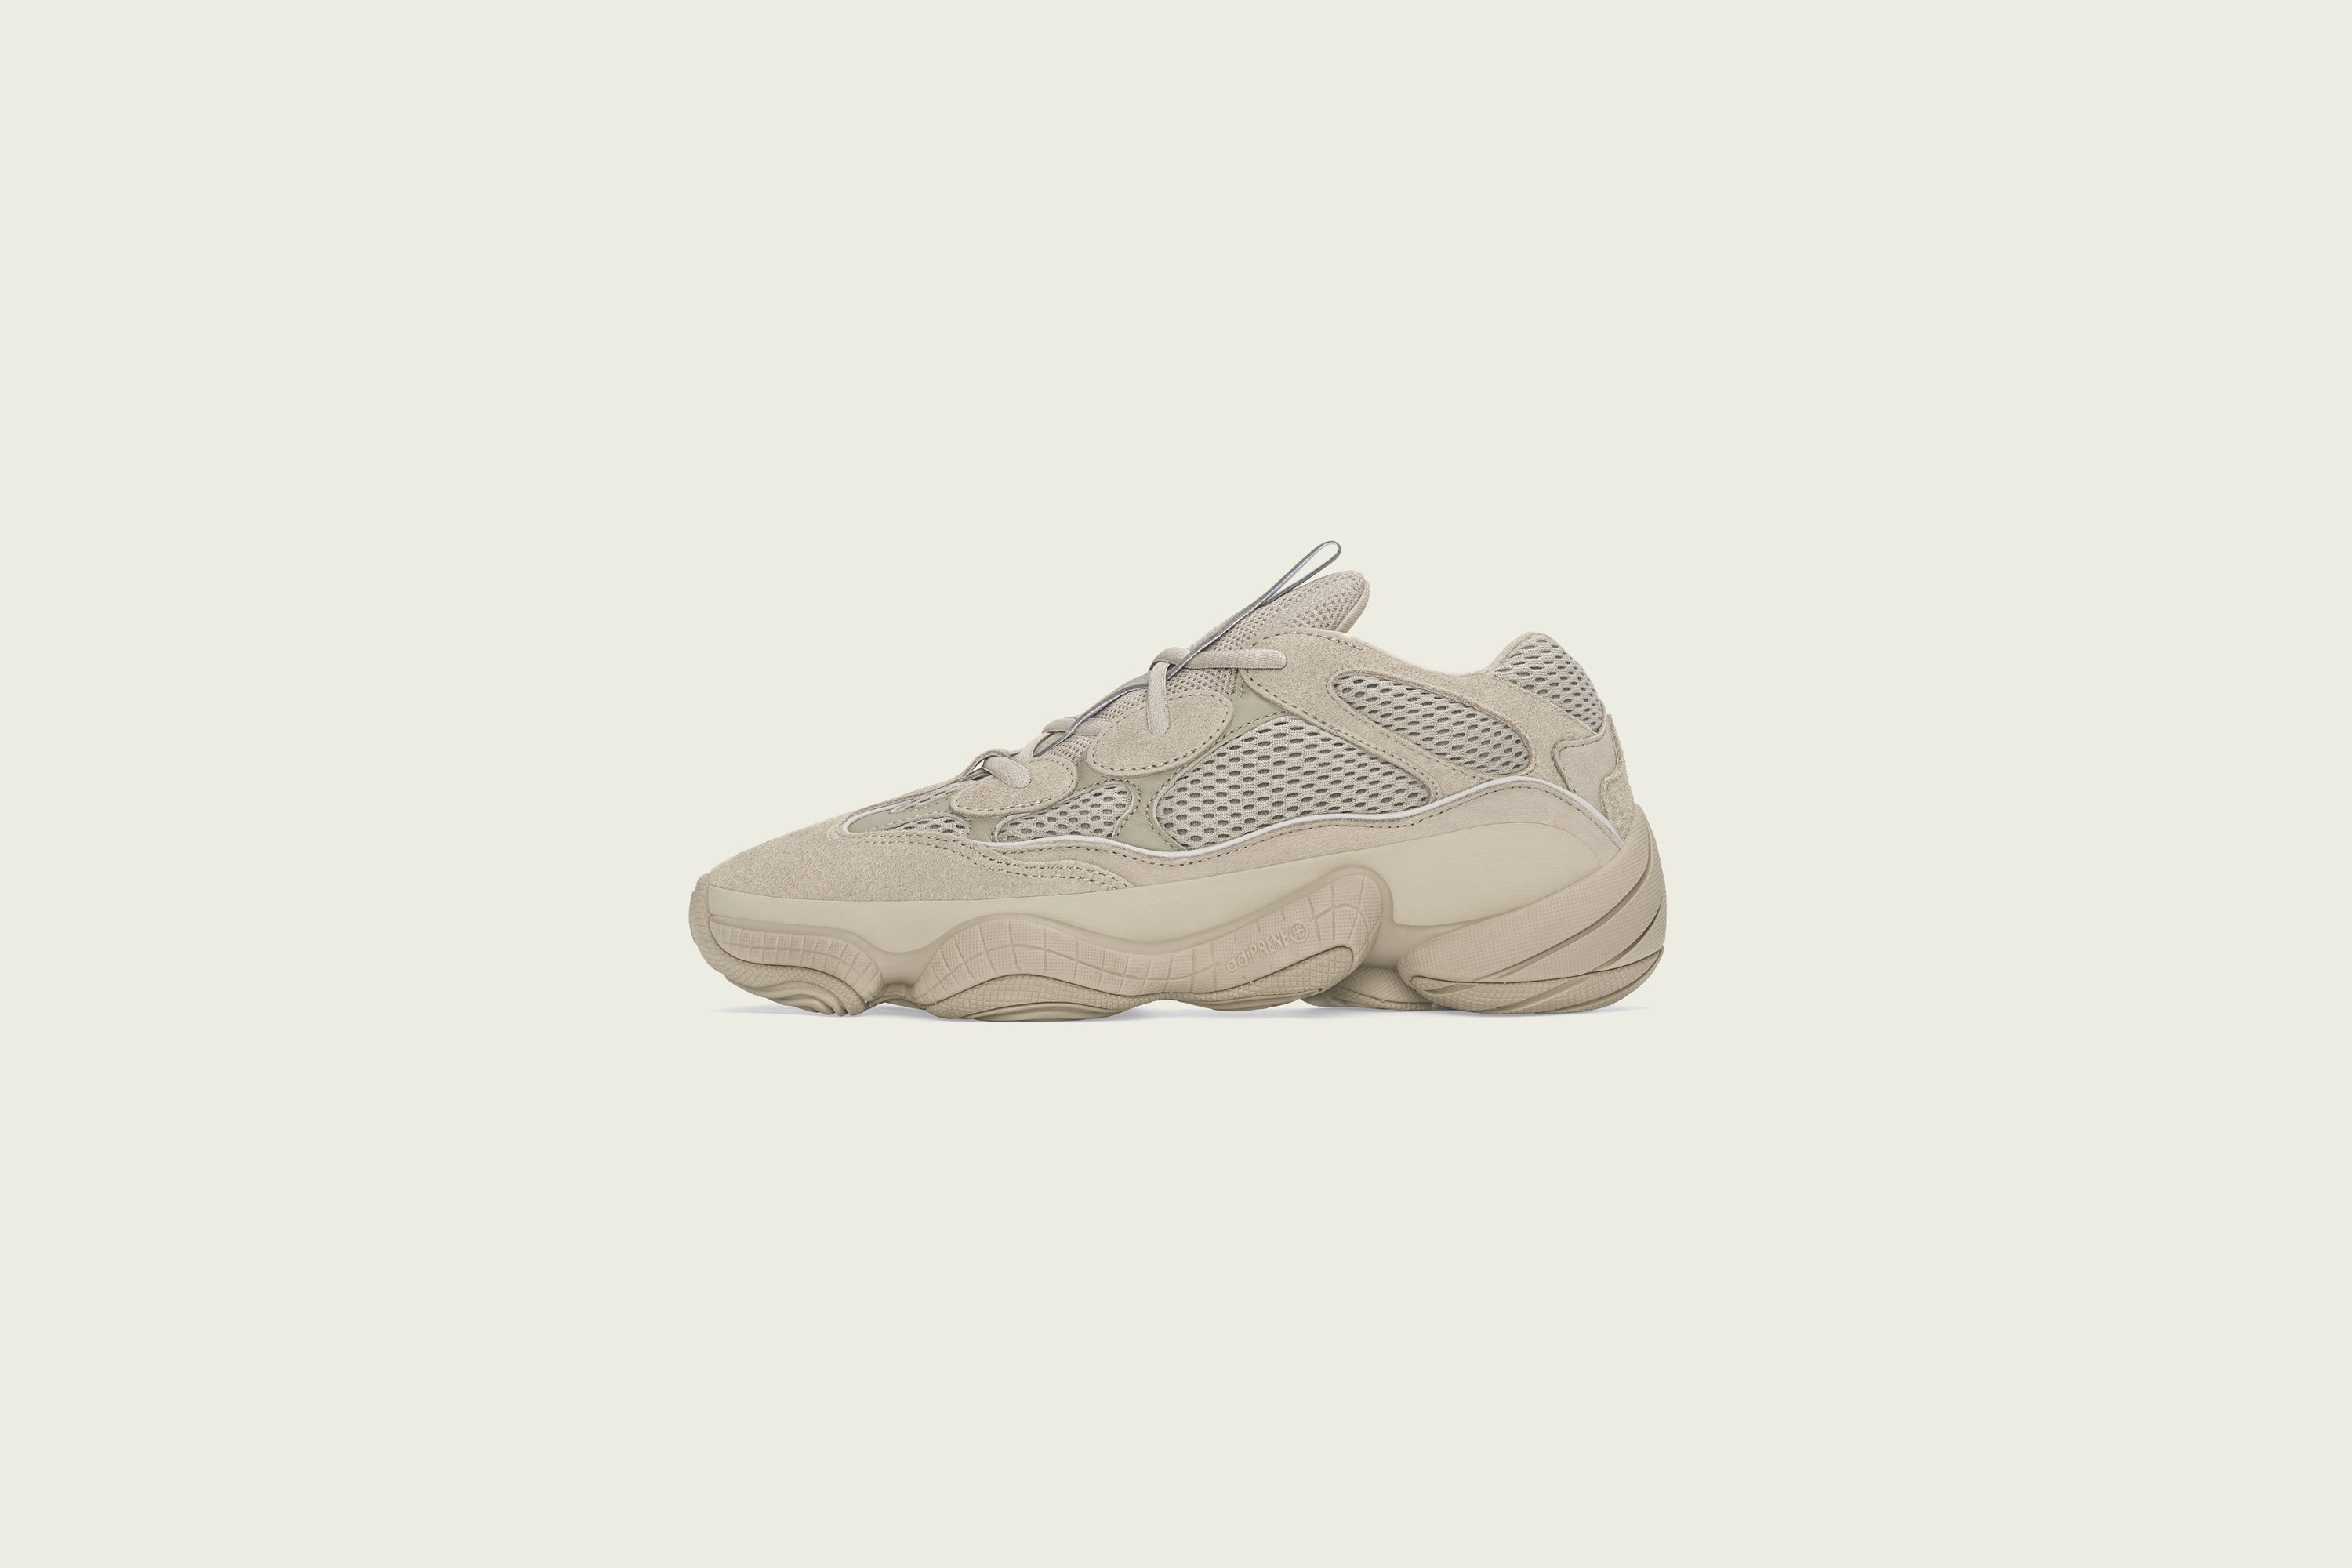 adidas - Yeezy 500 - Taupe Light - Up There